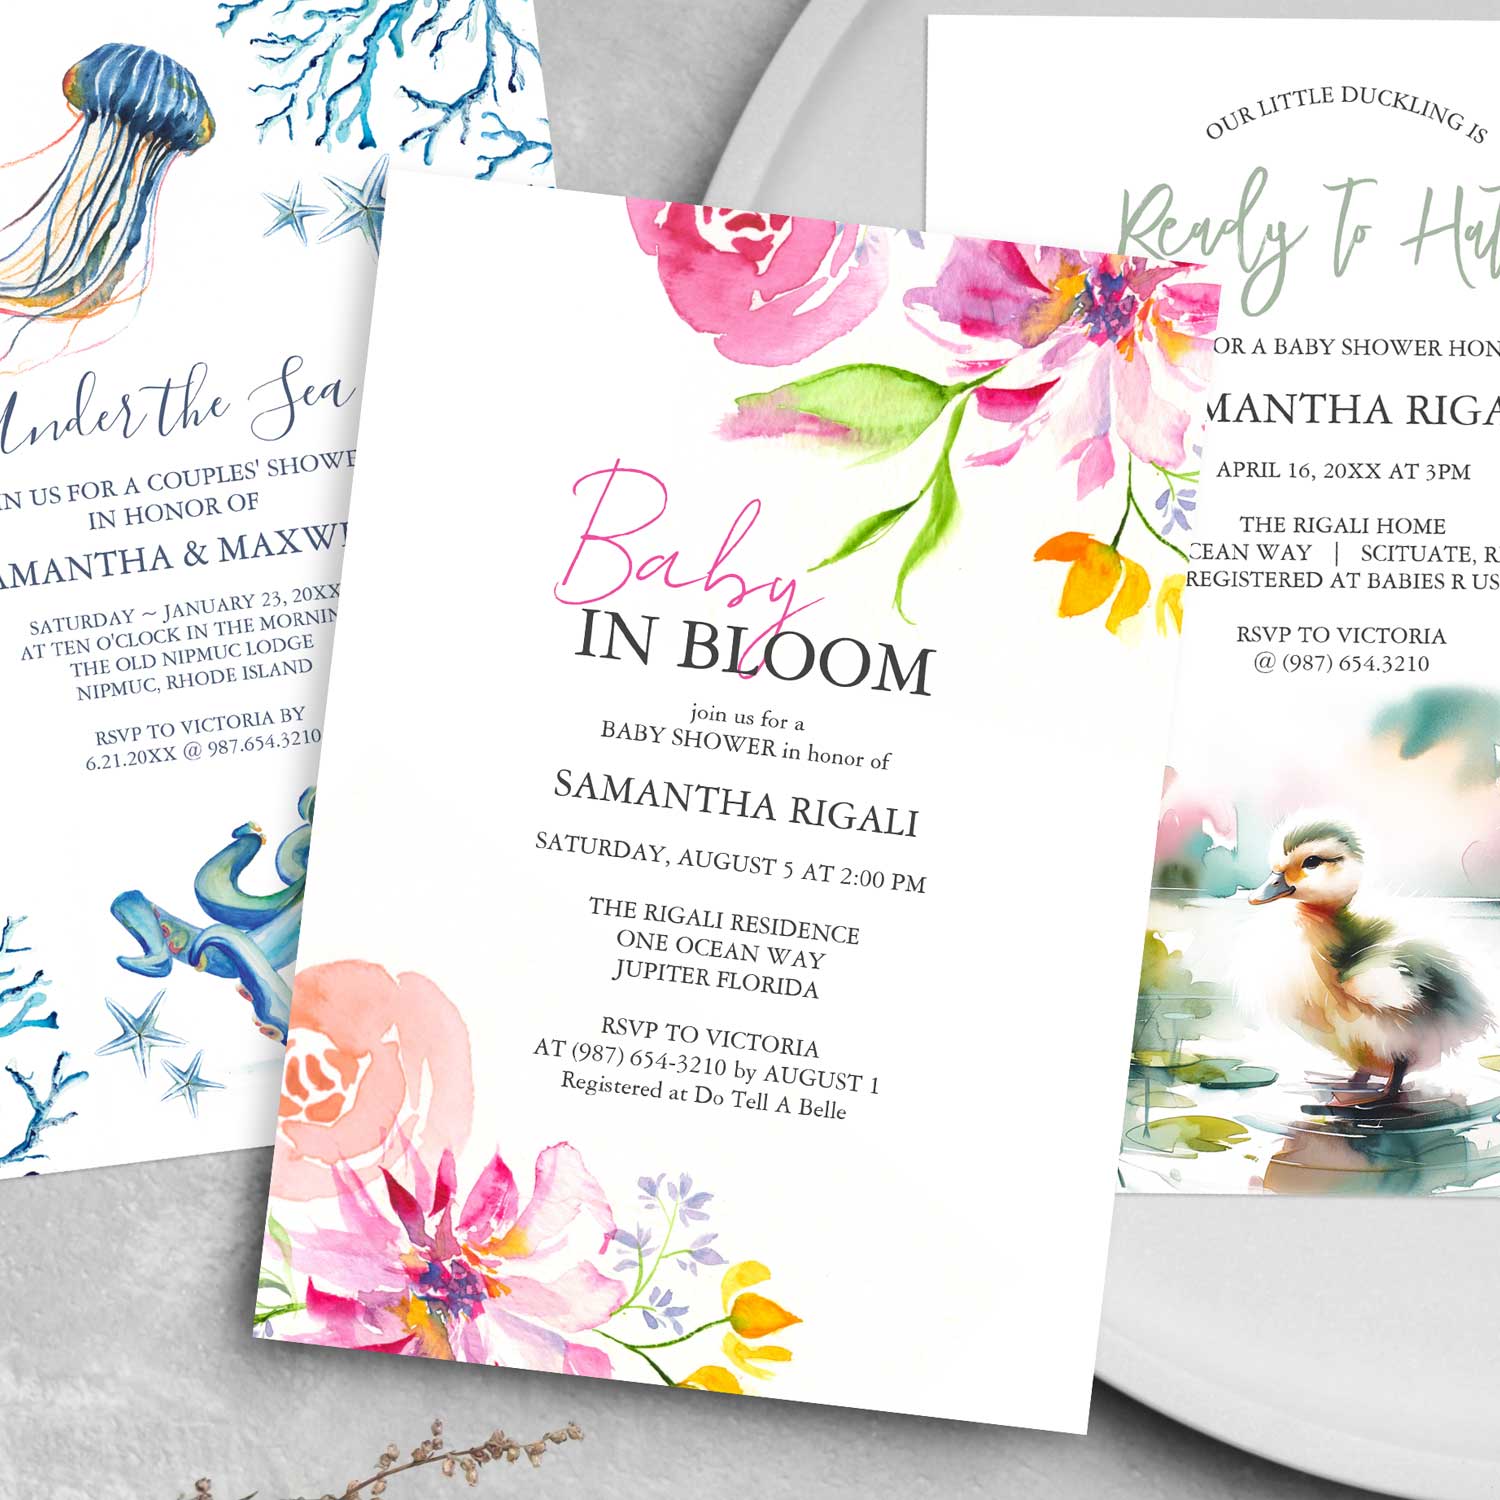 Printable baby shower invitations feature unique watercolor art and design by Victoria Grigaliunas of Do Tell A Belle. Click to download yours.